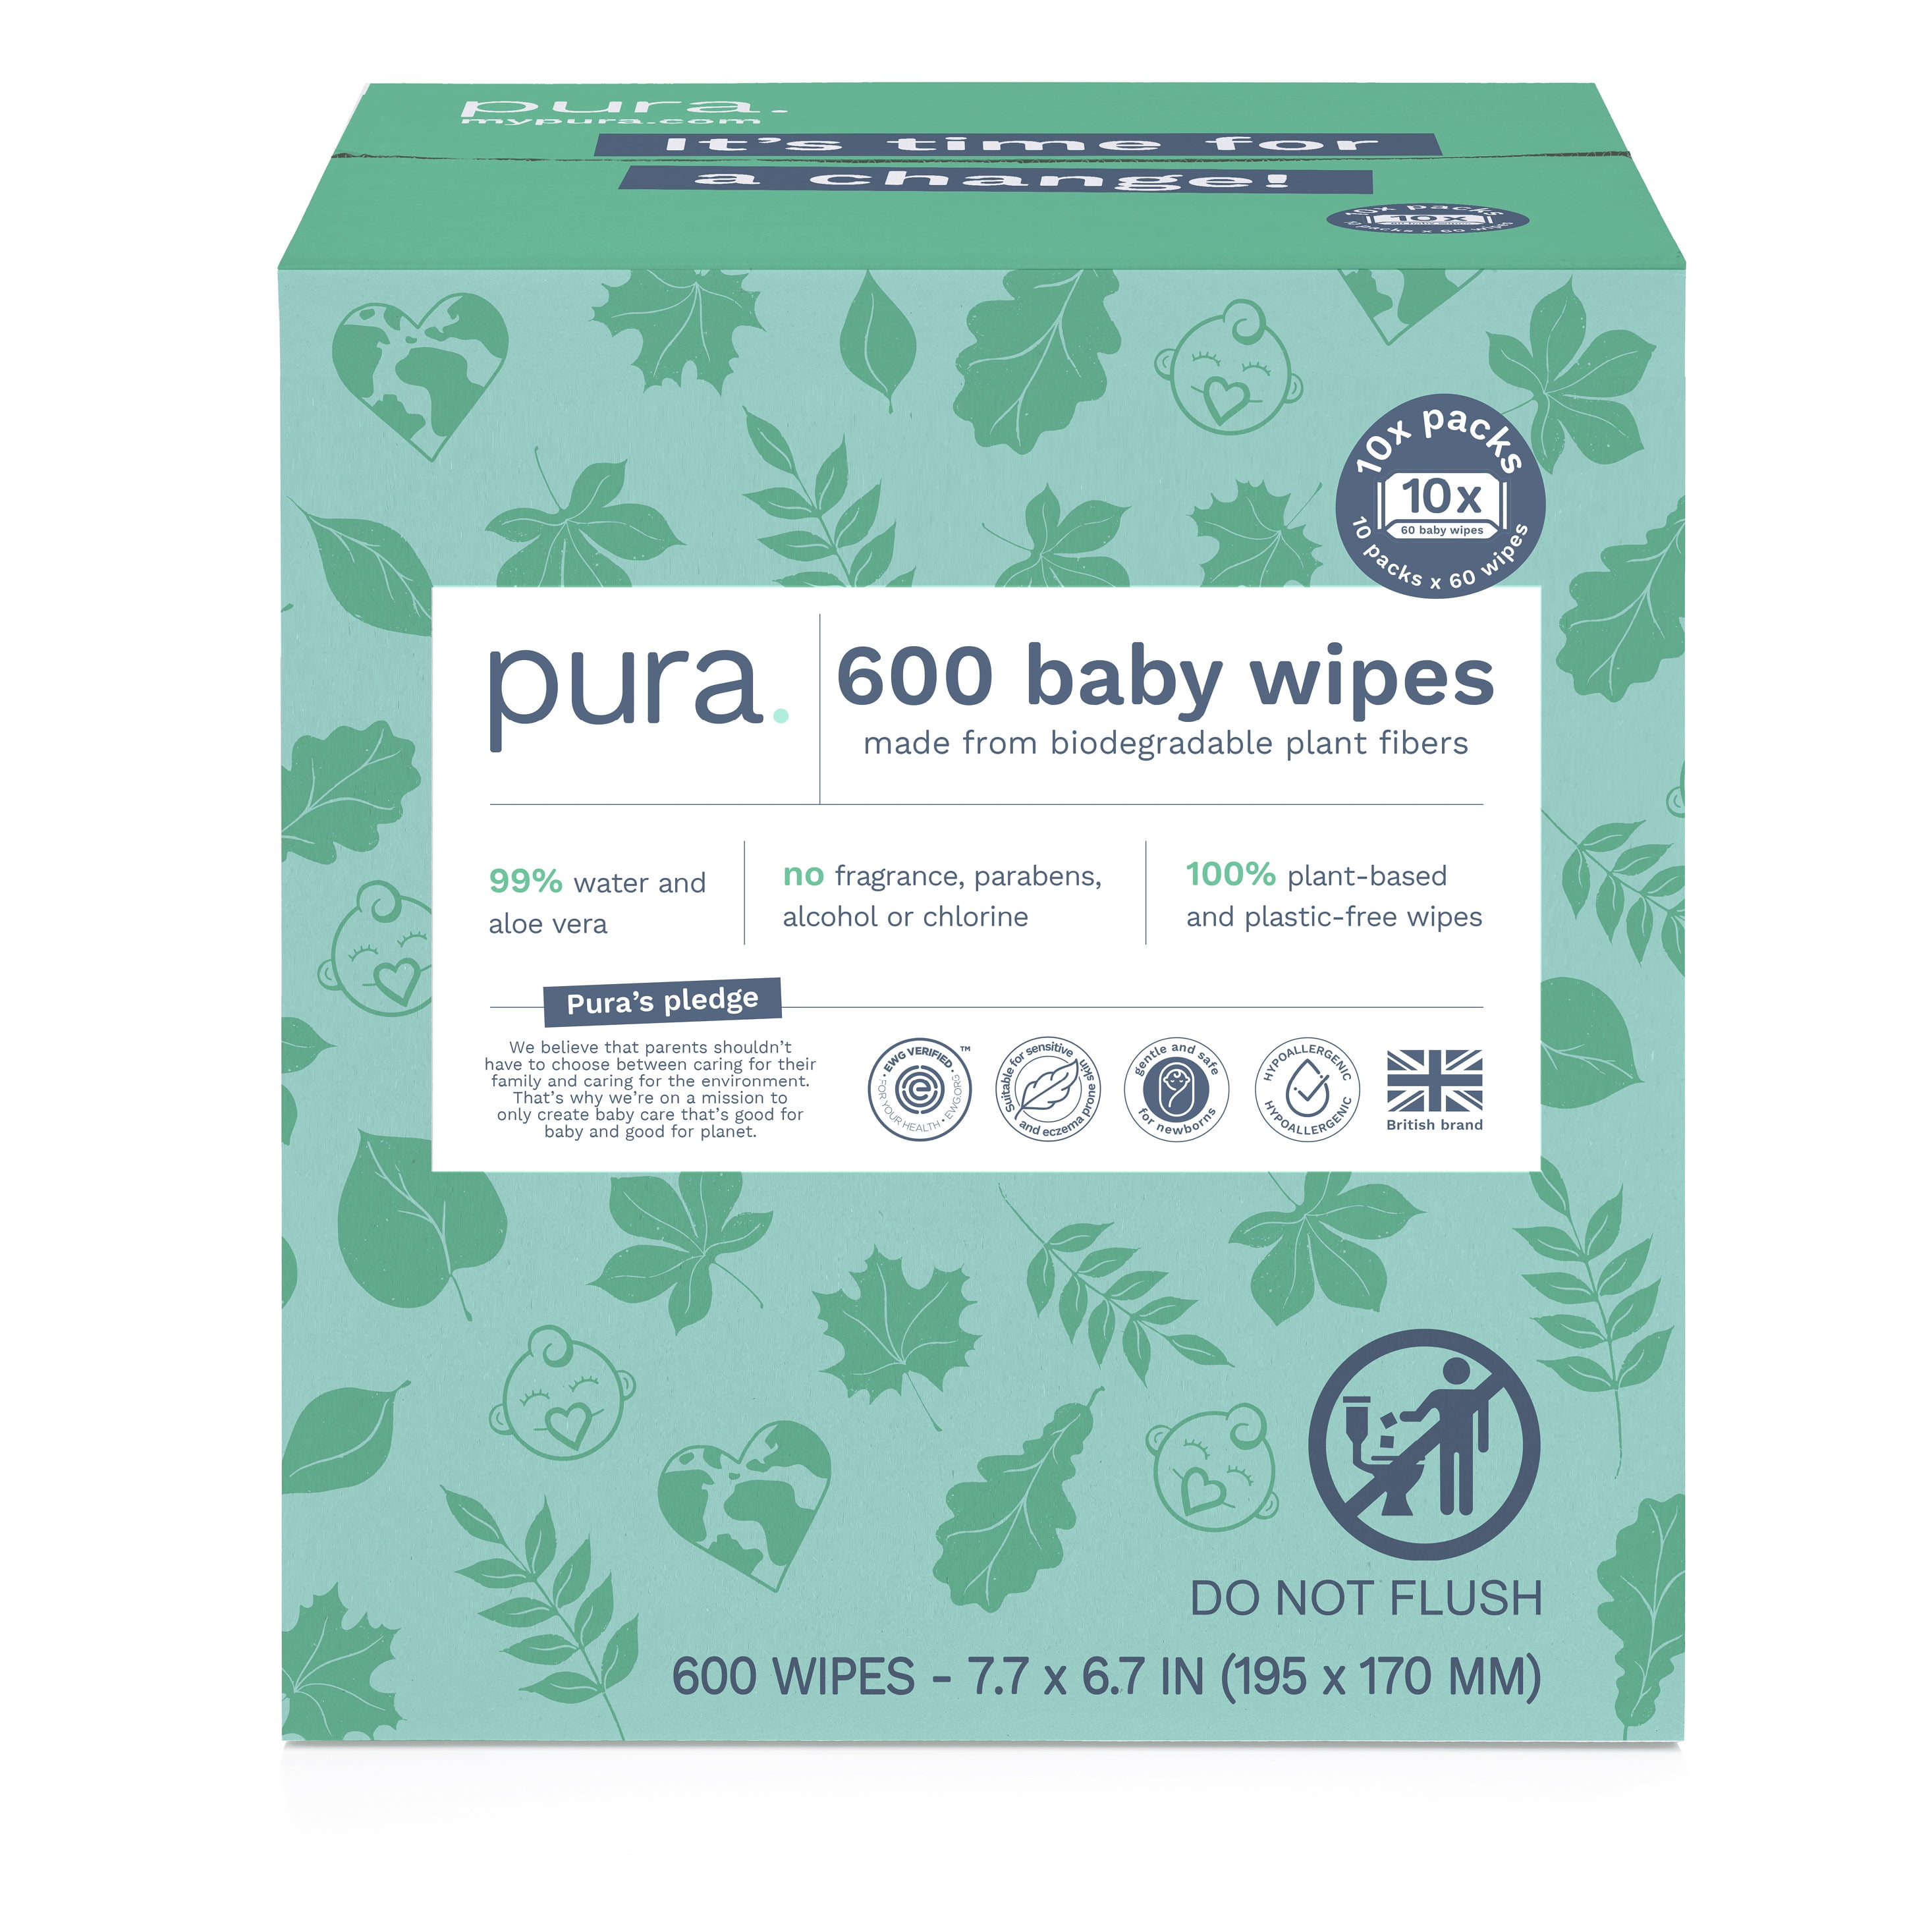 Pledge wipes contain formaldehyde releasers - Women's Voices for the Earth